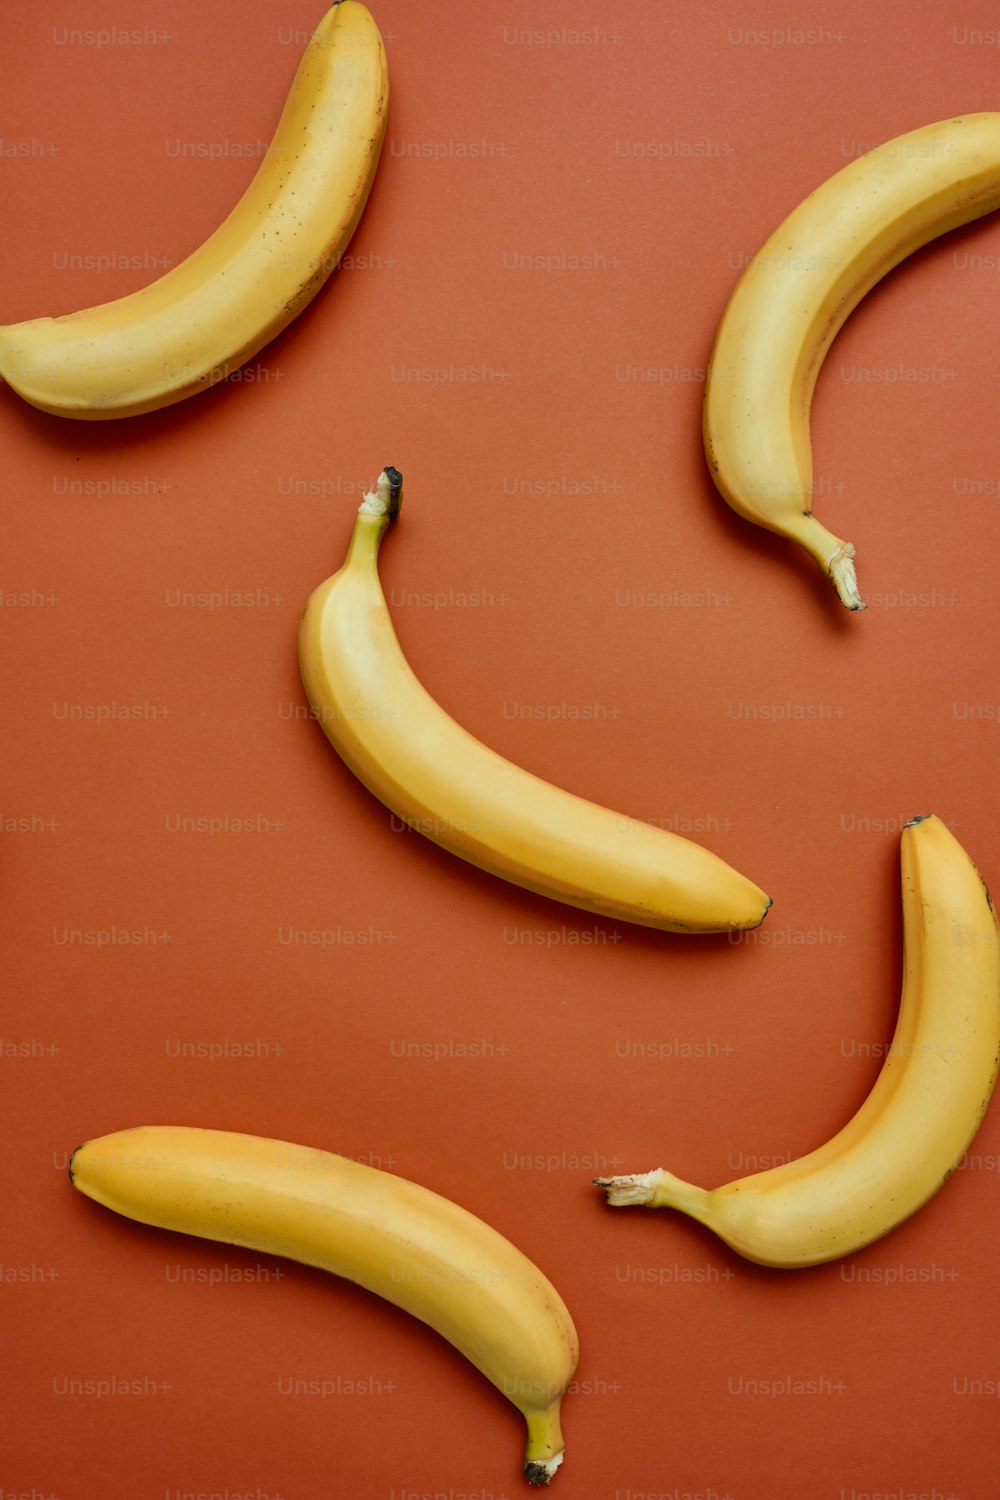 a group of three bananas sitting on top of a red table